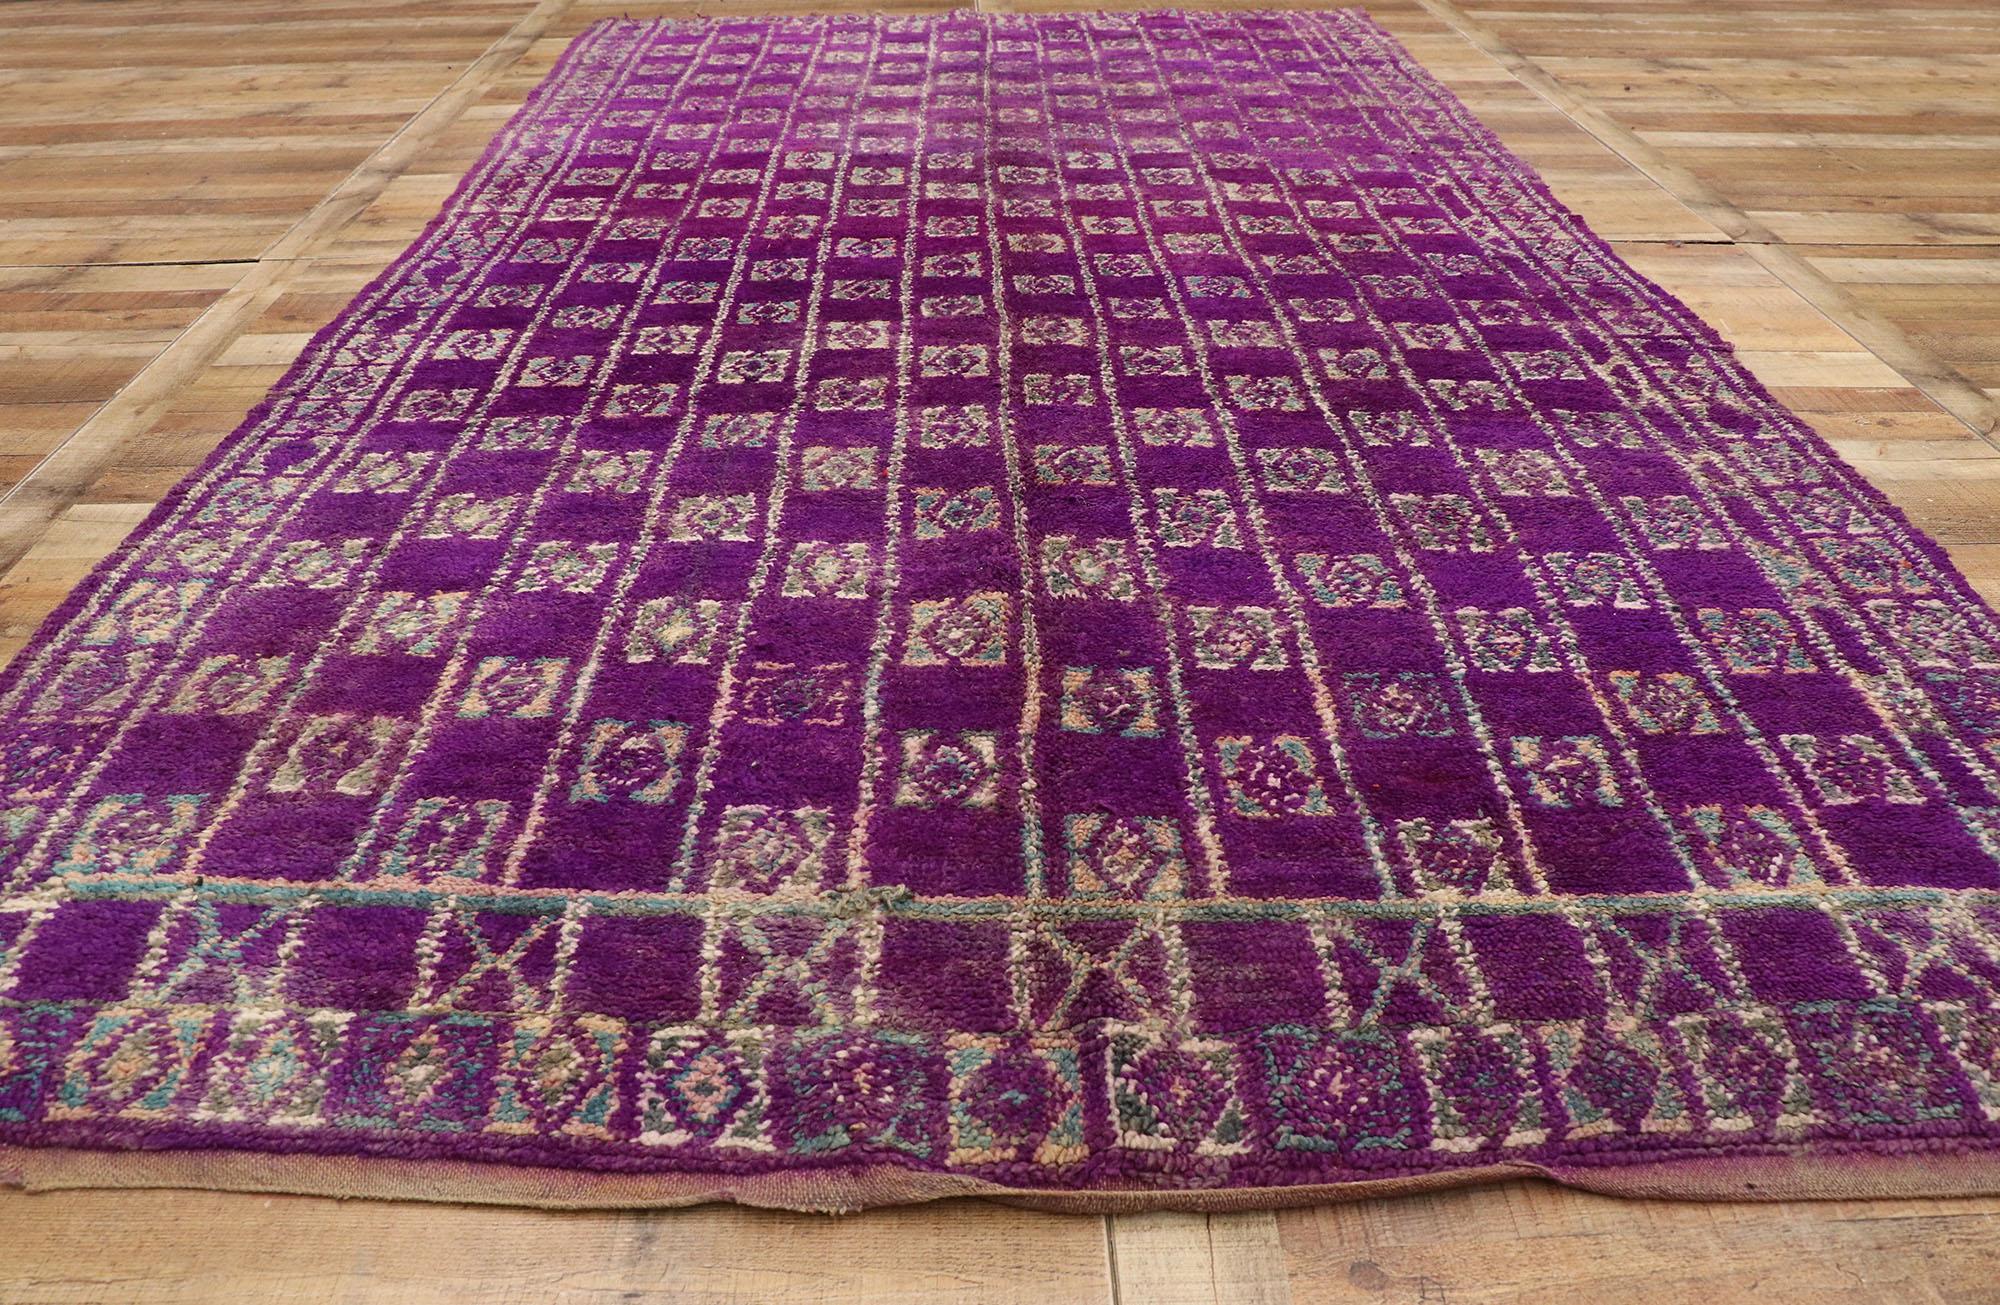 Vintage Purple Talsint Moroccan Rug by Berber Tribes of Morocco In Good Condition For Sale In Dallas, TX